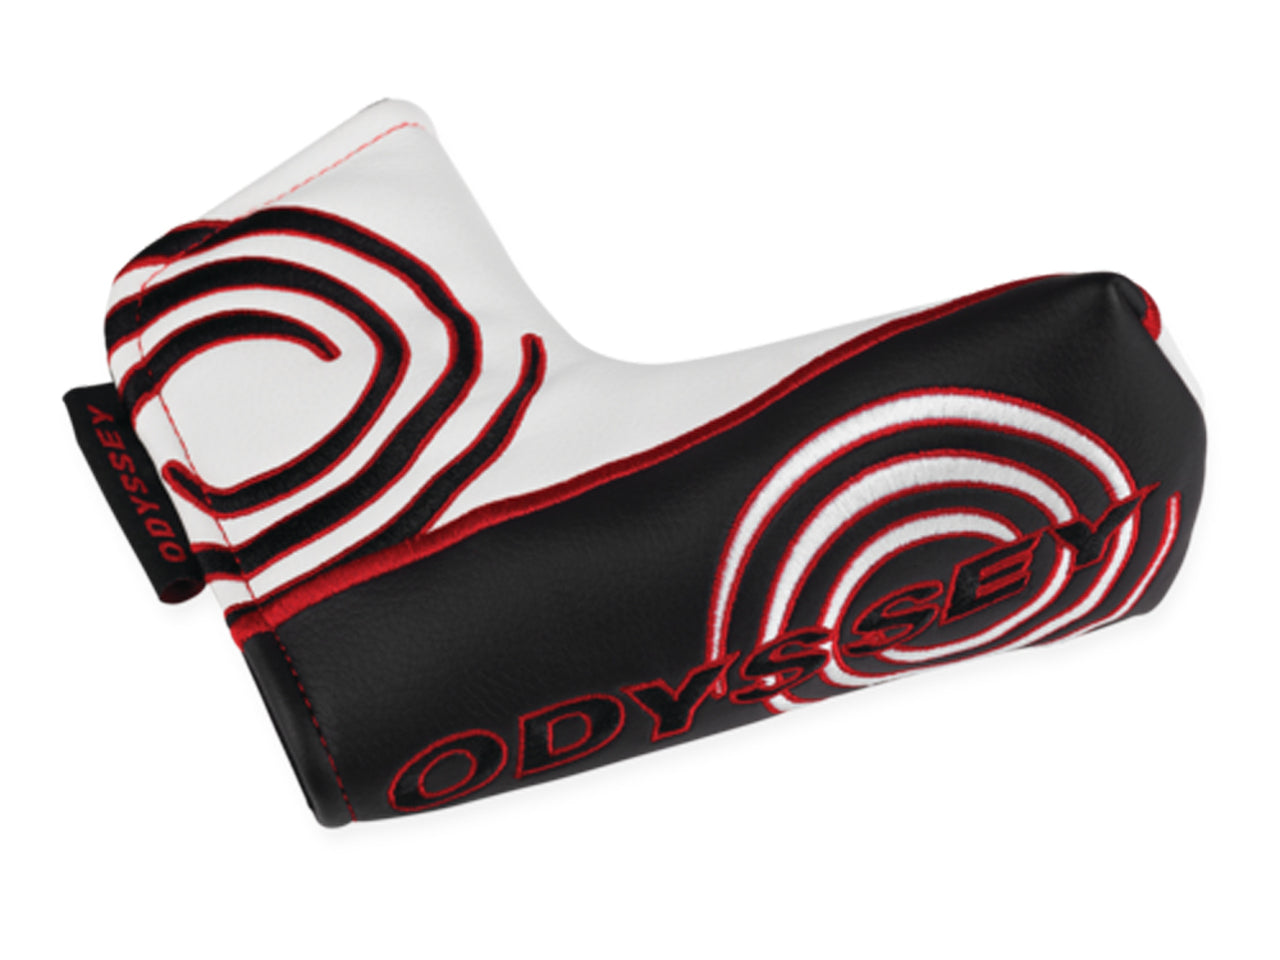 Odyssey Tempest III Head Cover